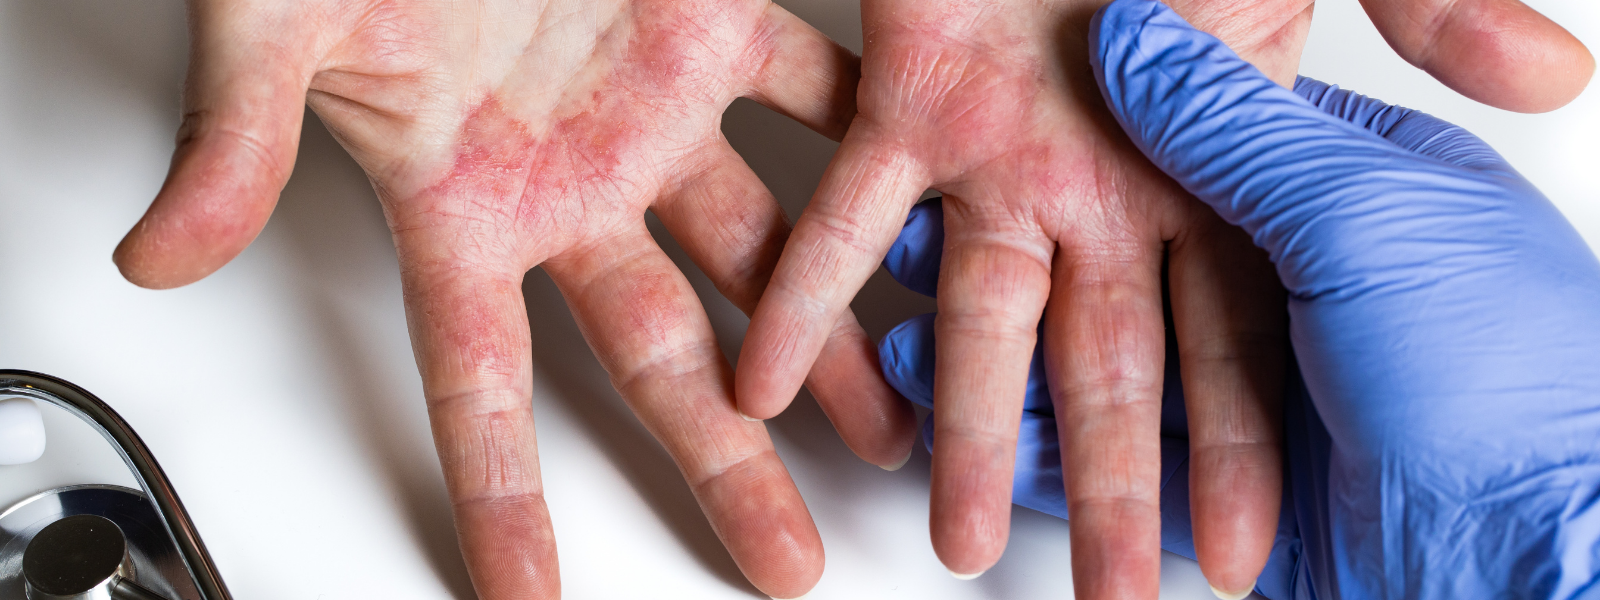 A dermatologist examines rashes on a patient's hands